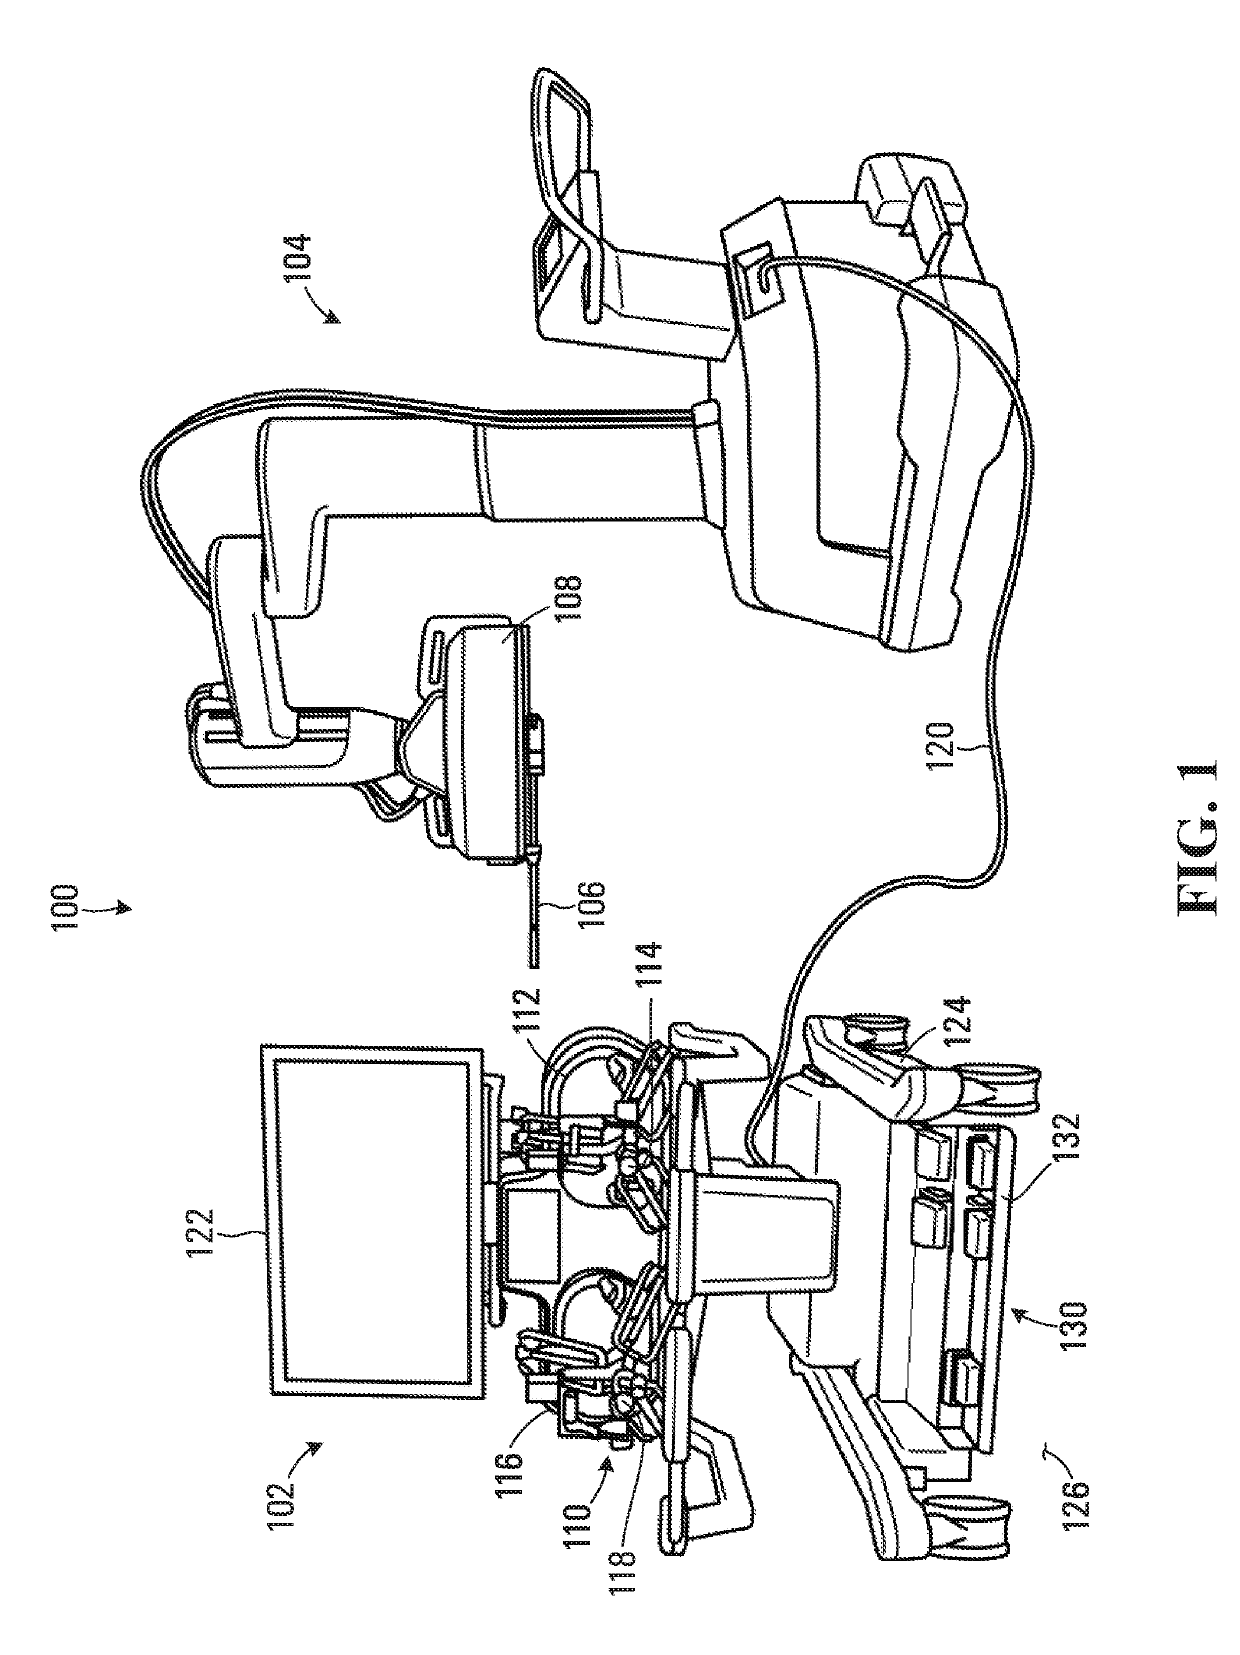 Foot pedal apparatus for use with a workstation controlling a robotic surgery system